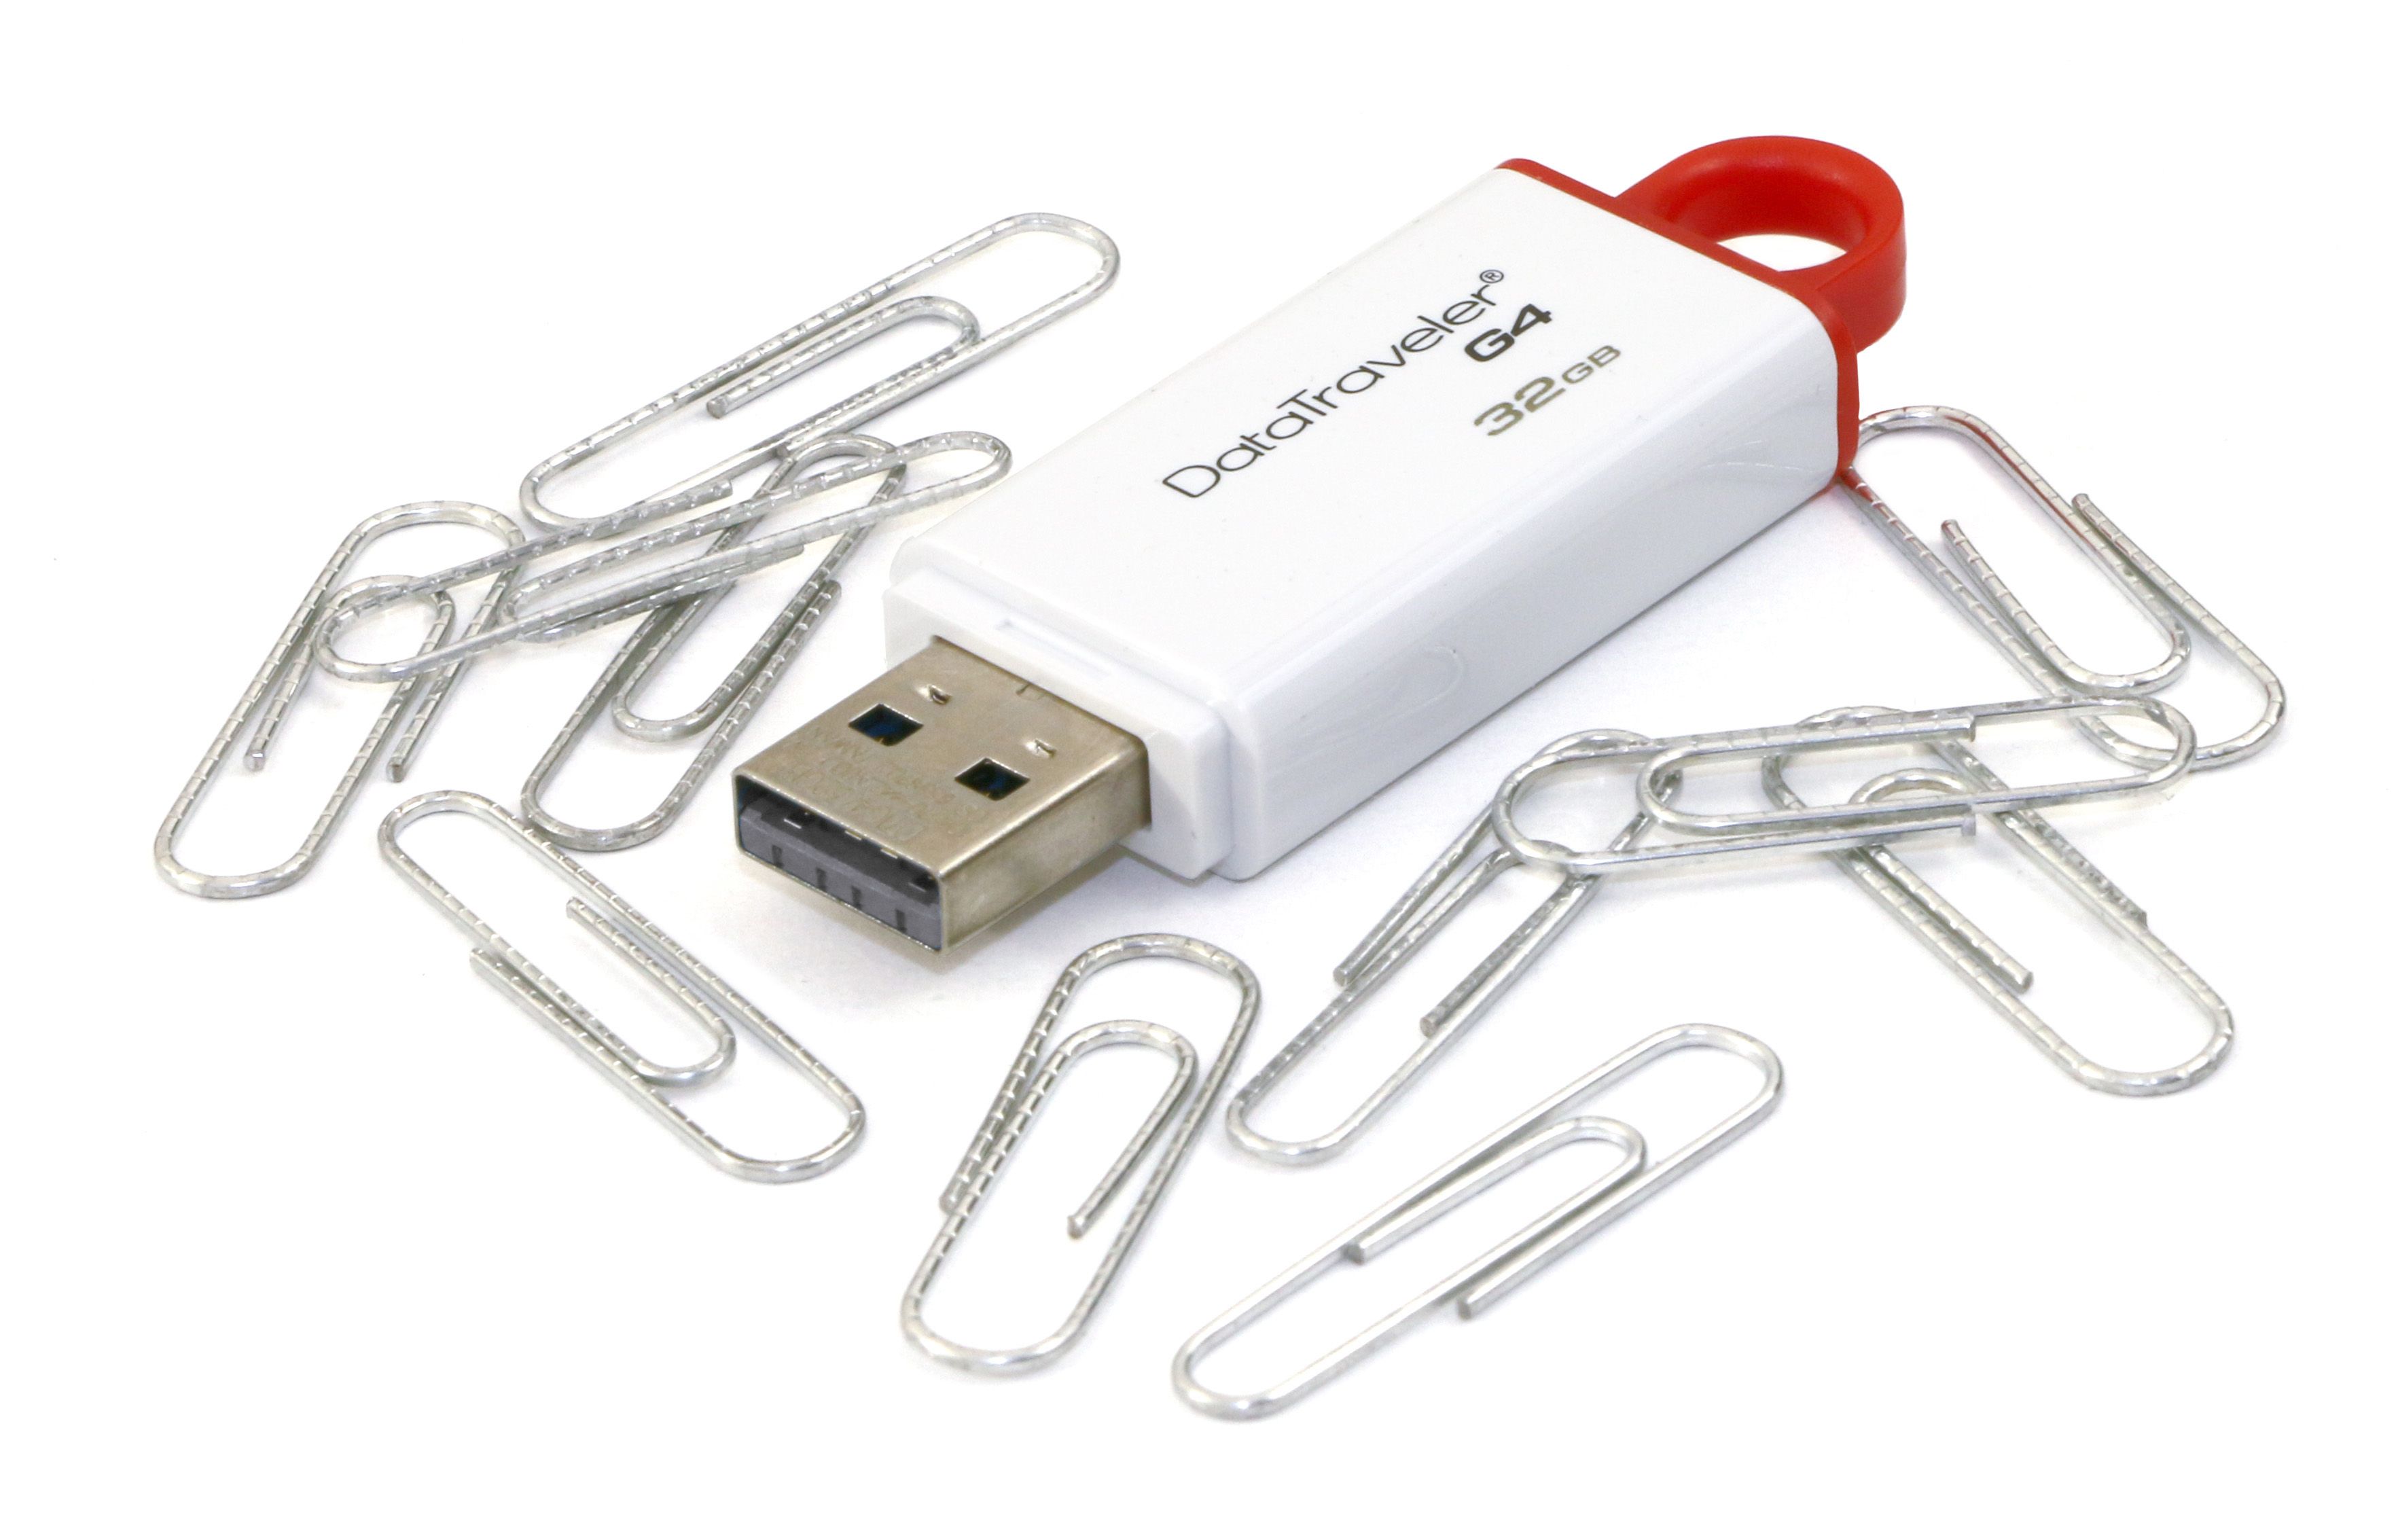 USB stick with paperclips